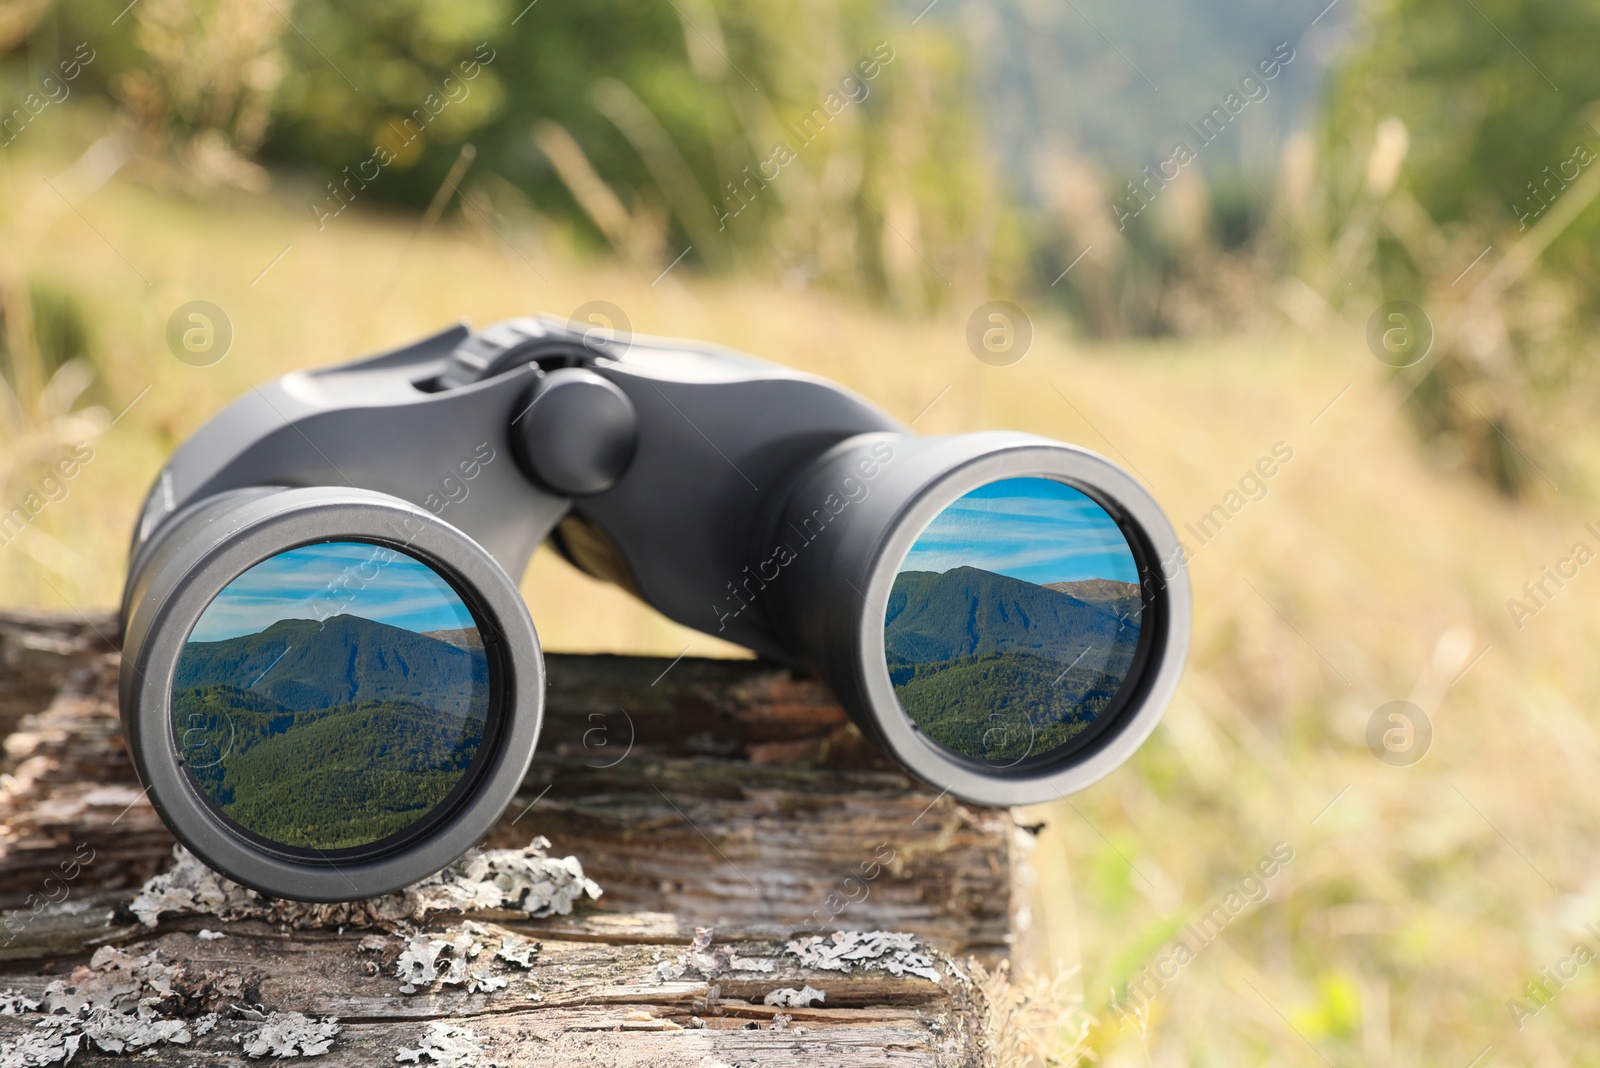 Image of Binoculars on wooden log outdoors. Mountain landscape reflecting in lenses